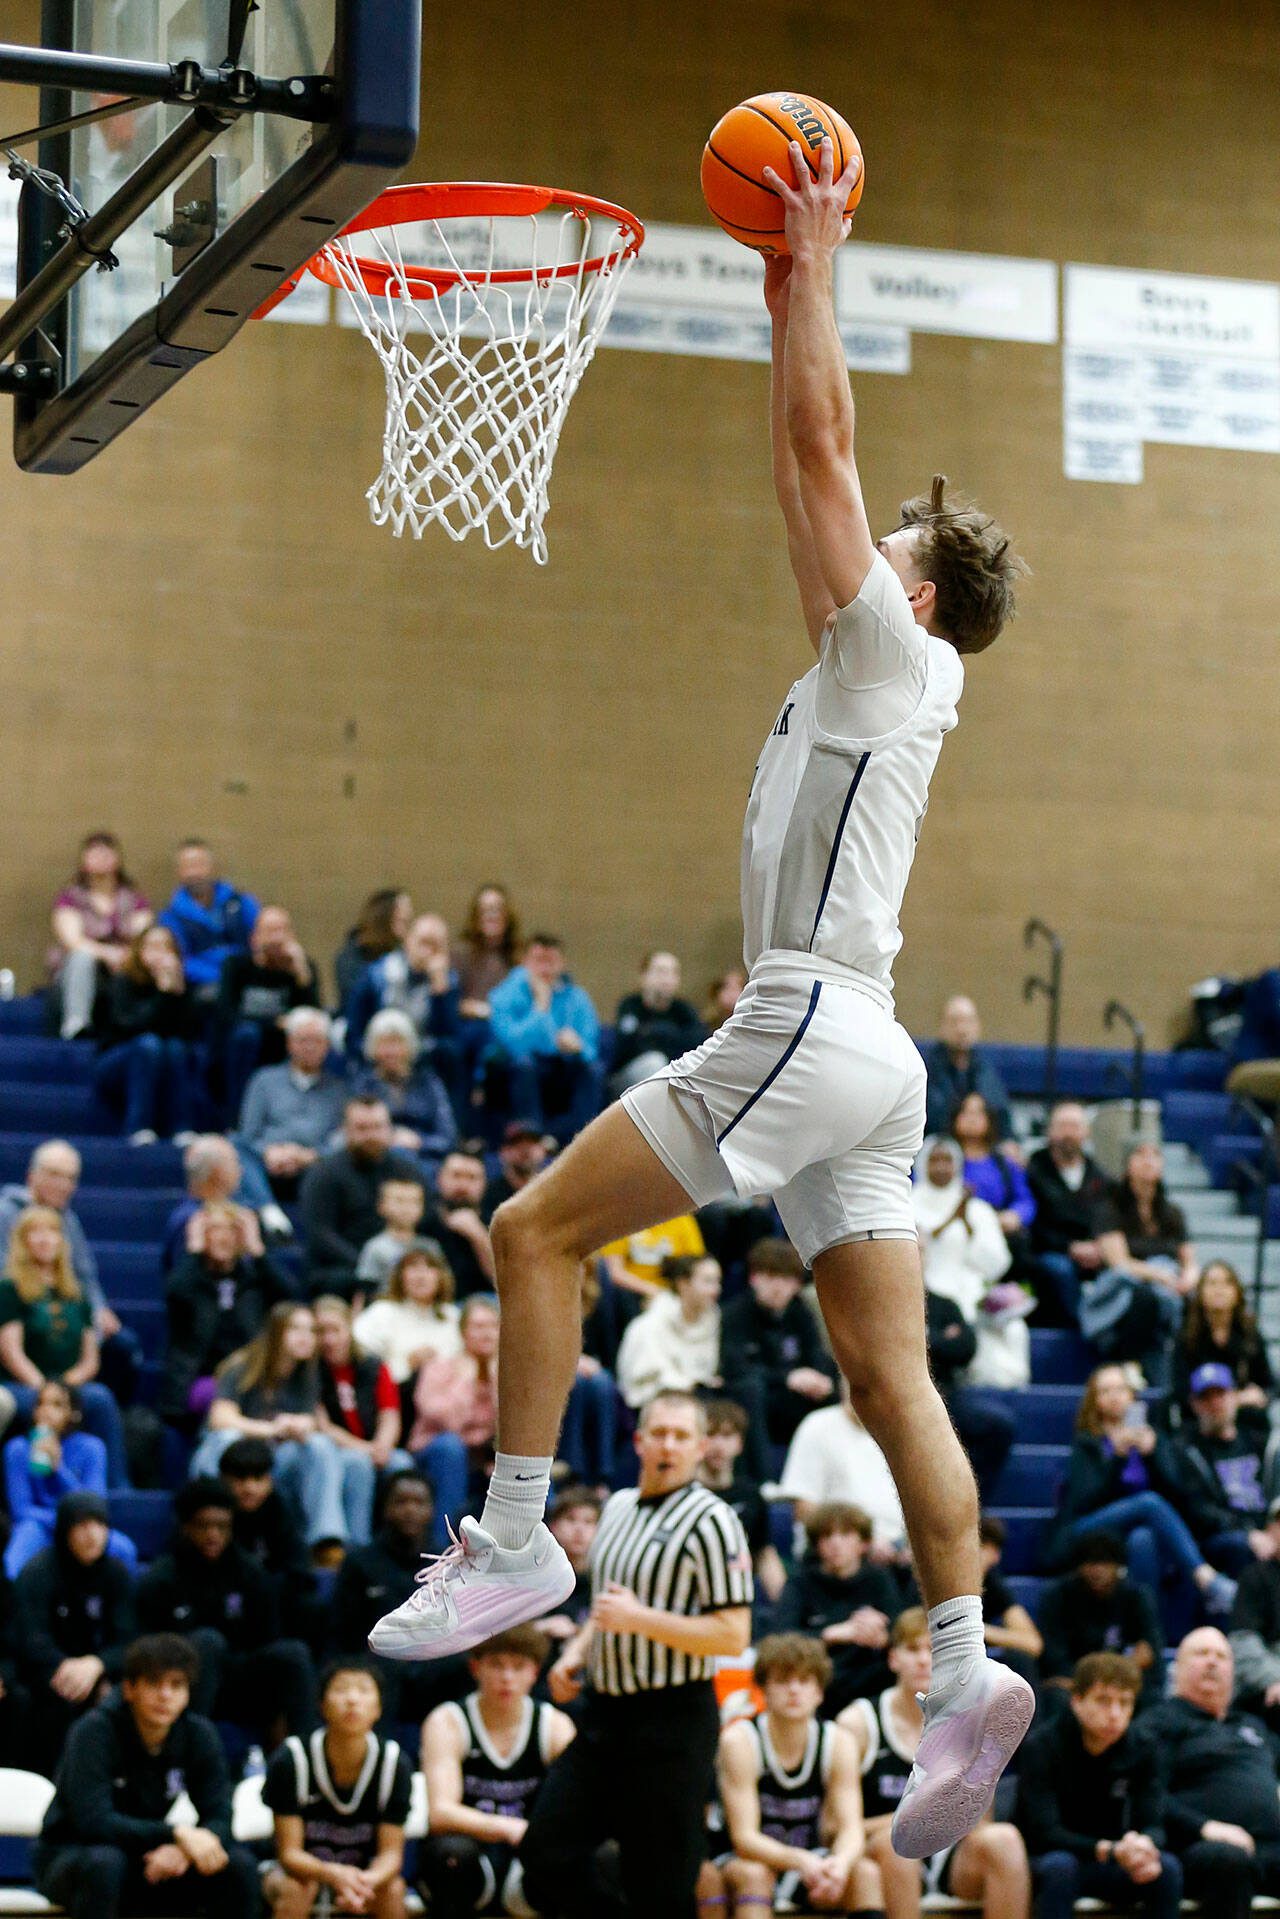 Glacier Peak junior wing Jo Lee takes flight and finishes a fast break with a slam dunk against Kamiak during a game Thursday at Glacier Peak High School in Snohomish. (Ryan Berry / The Herald)